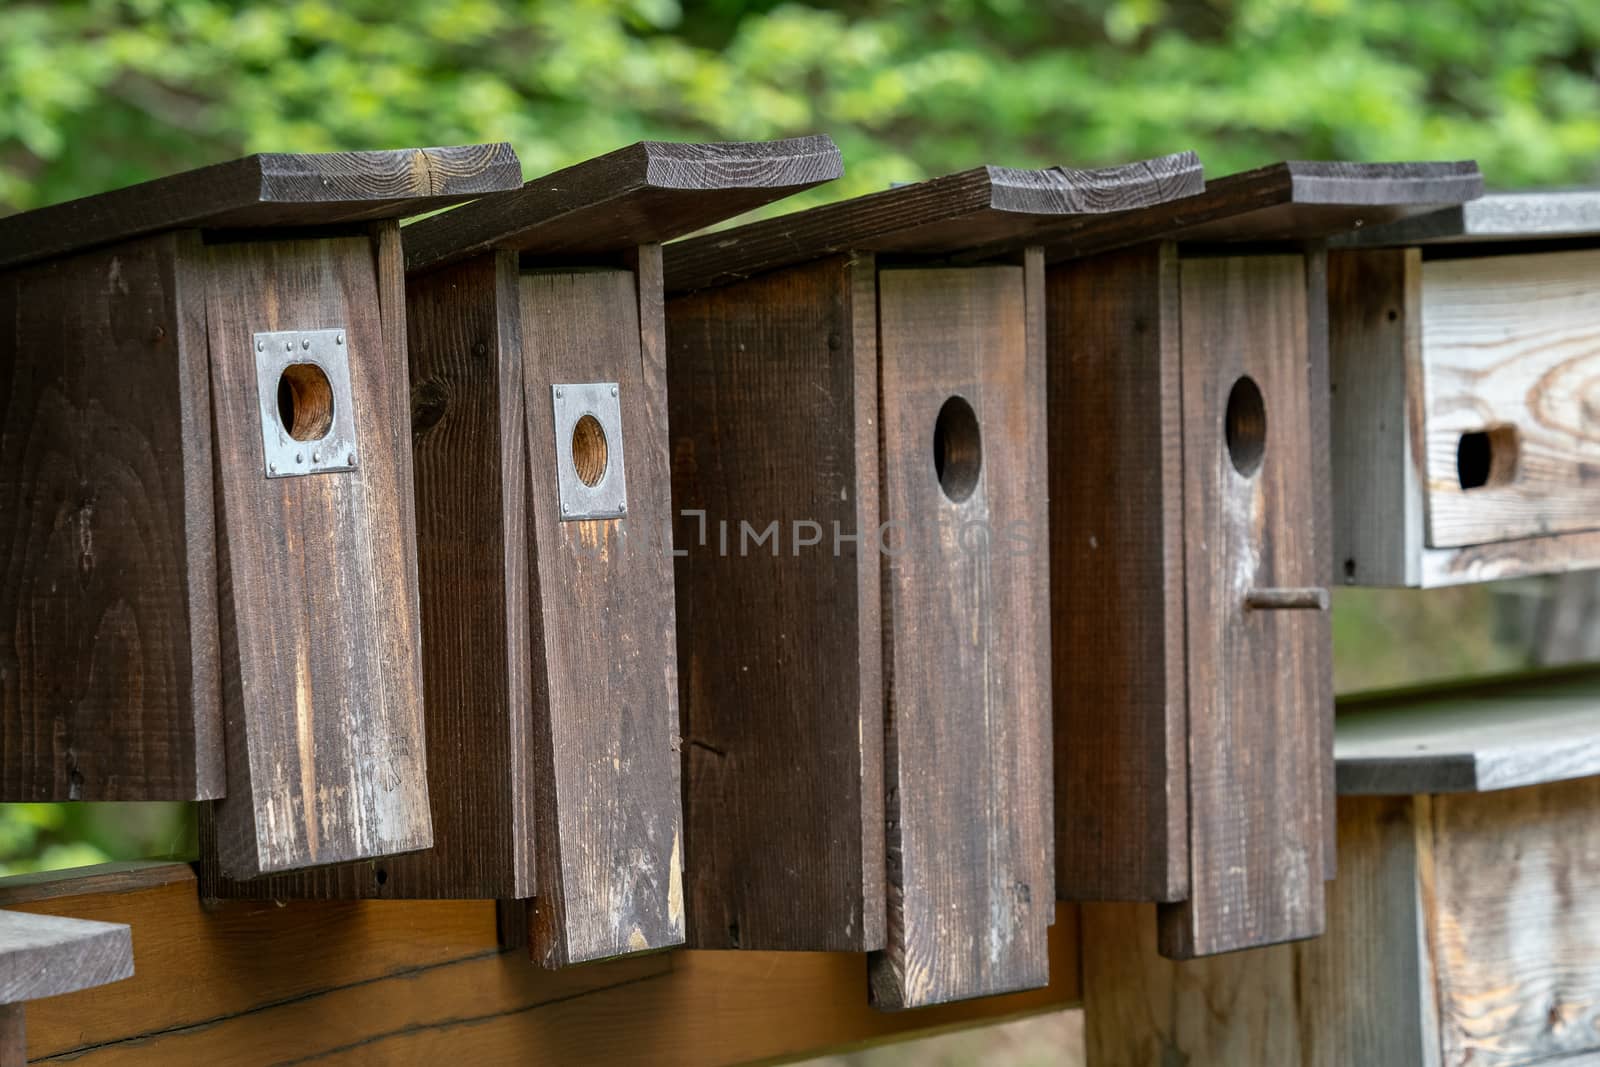 Wooden bird houses in a row, bird boxes. by xtrekx